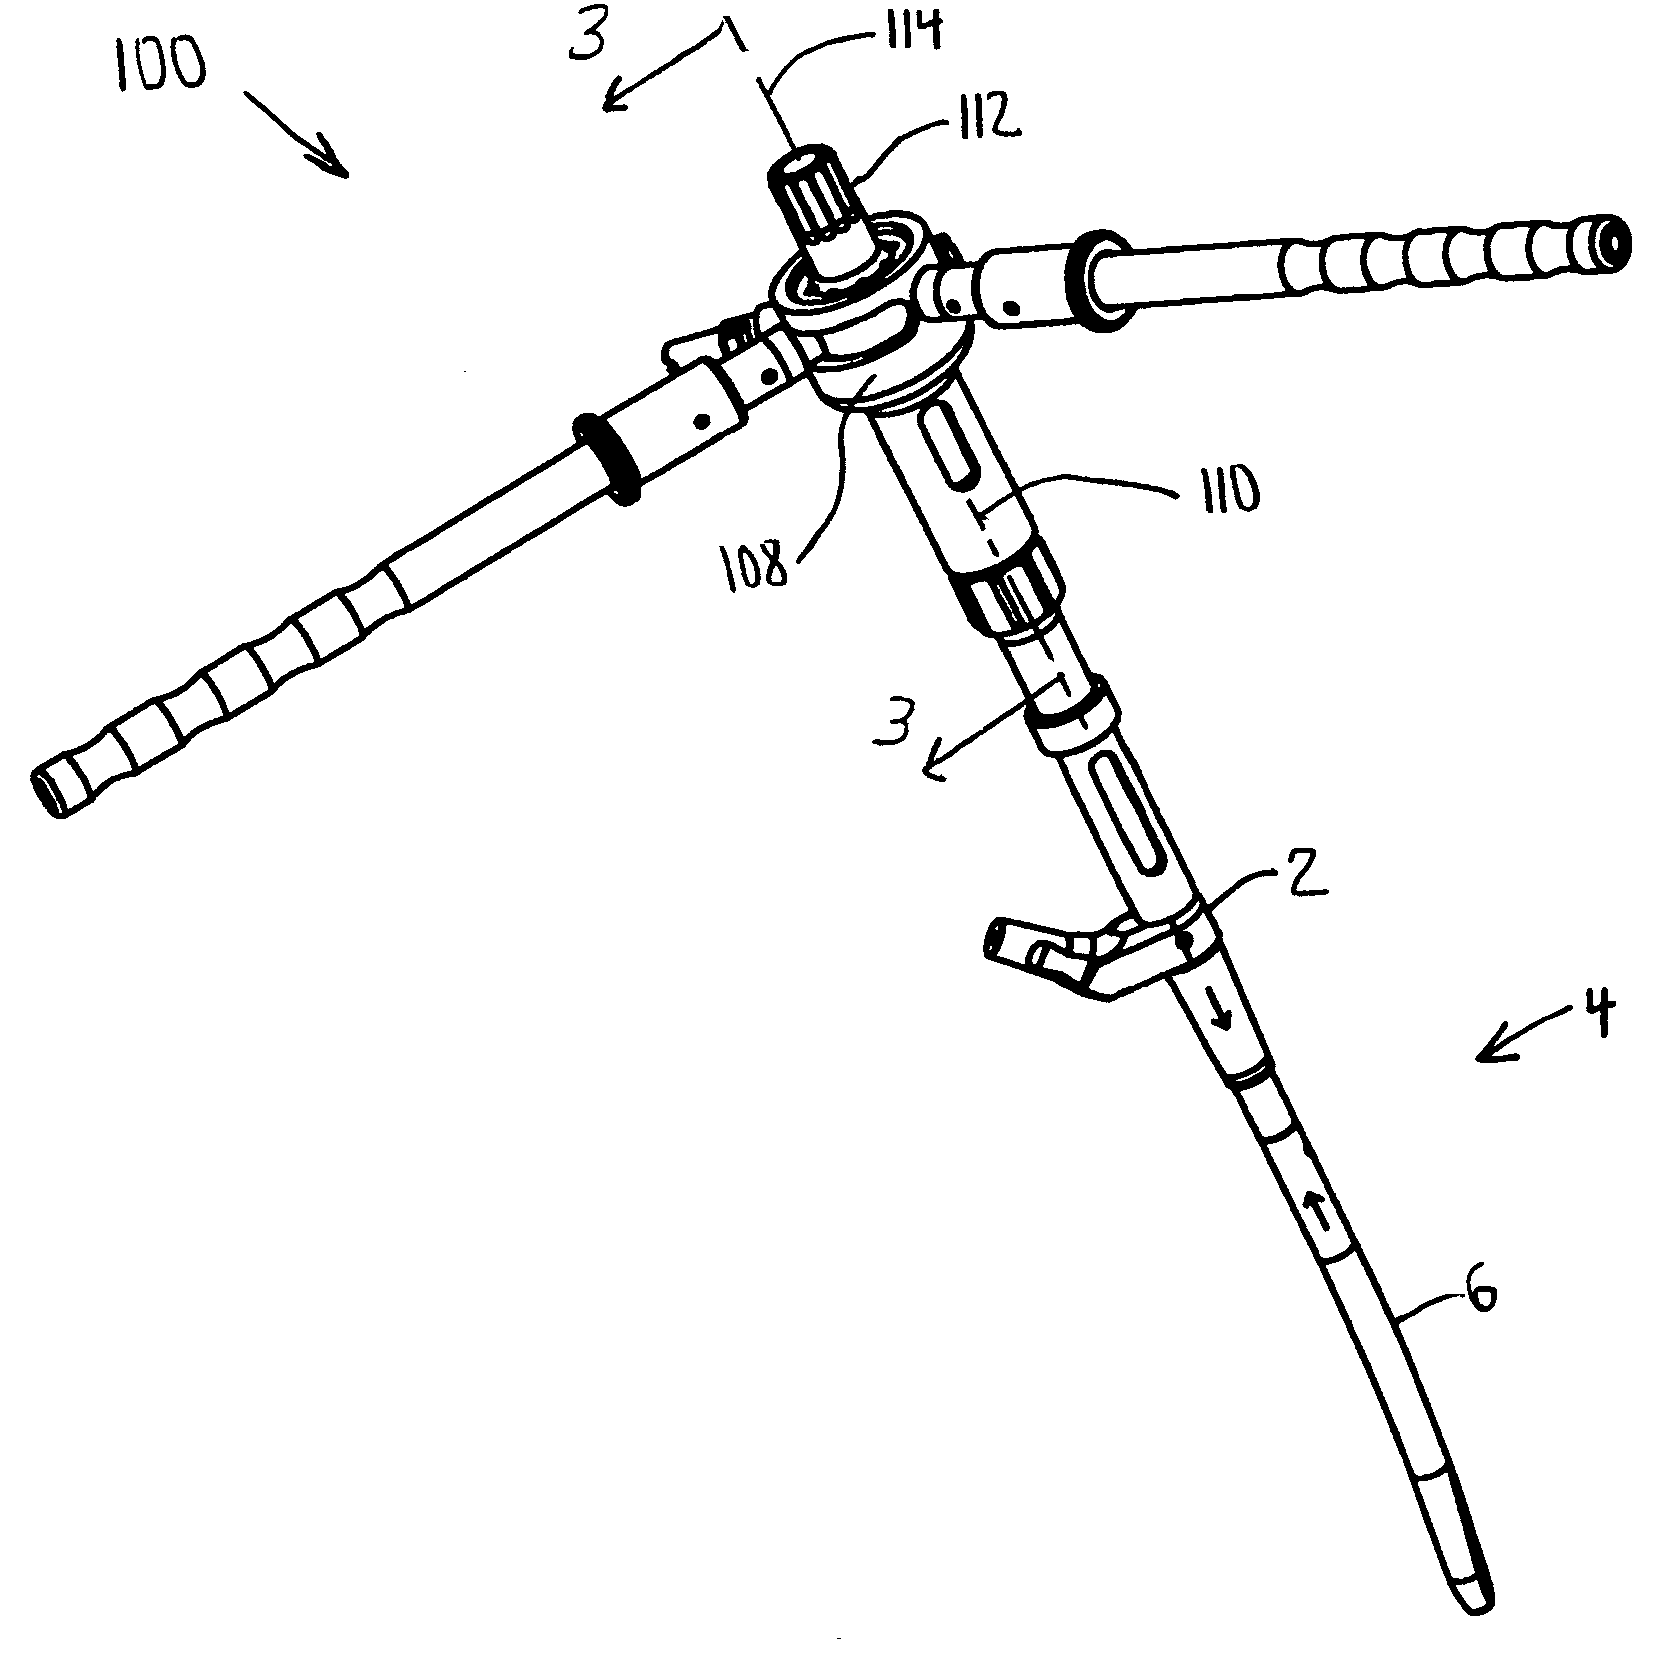 Assembly tool for modular implants and associated method